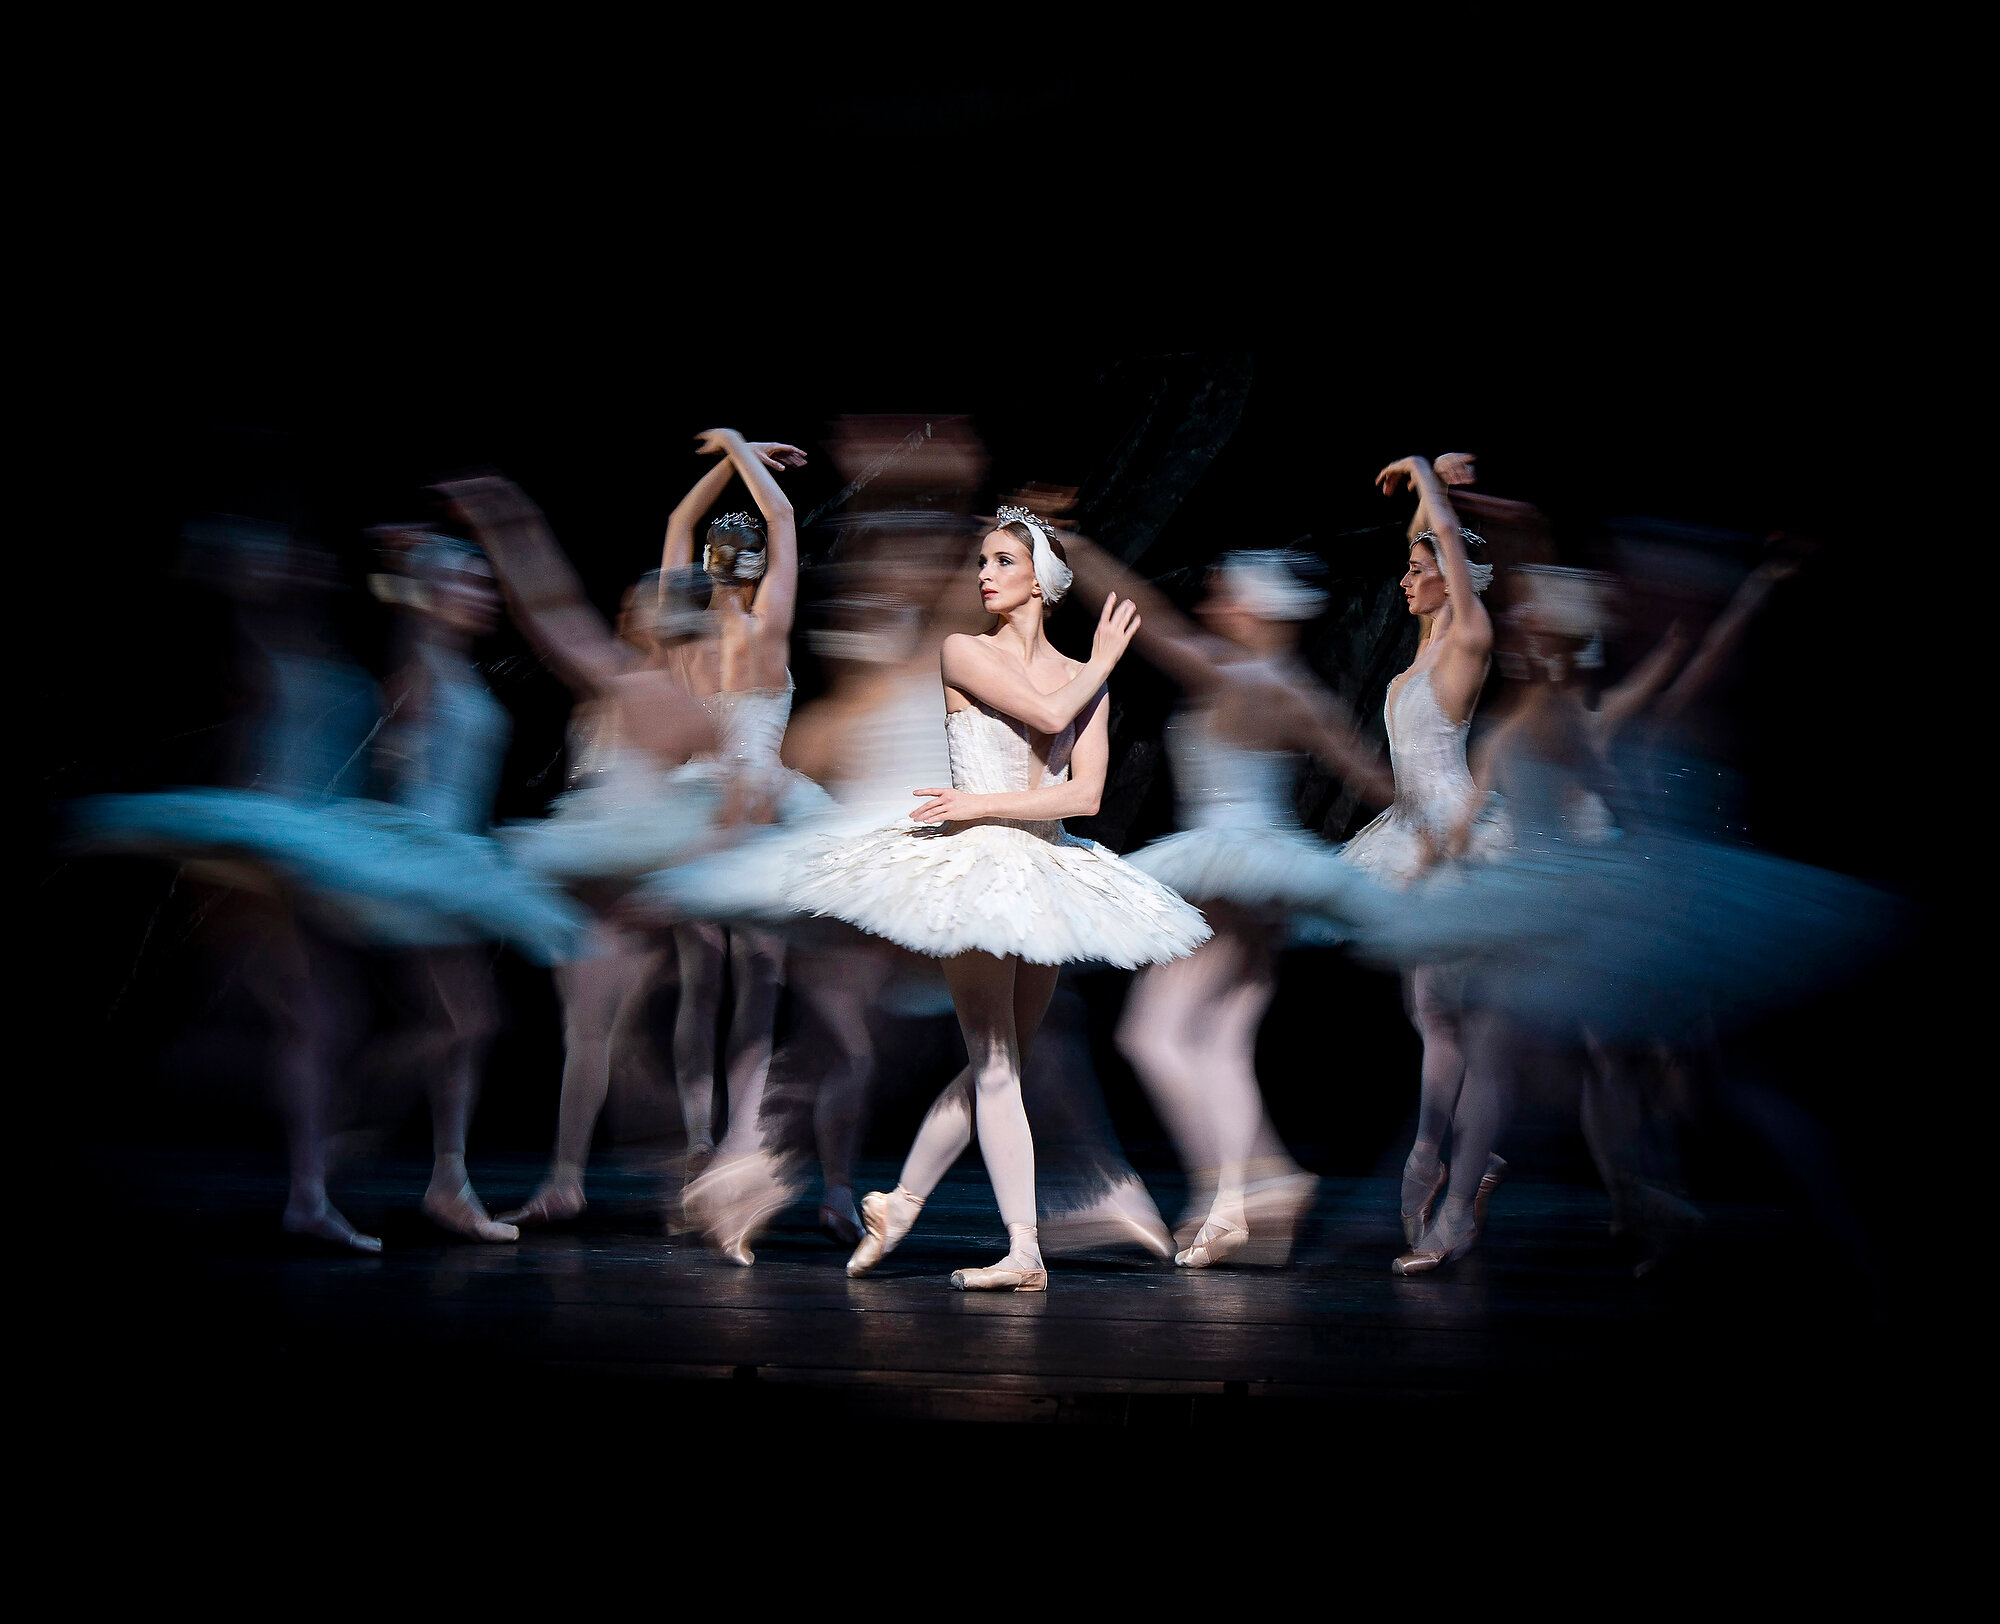  Lauren Cuthbertson as Odette in a dress rehearsal for The Royal Ballet’s Swan Lake choreographed by Marius Petipa and Lev Ivanov at the Royal Opera House in Covent Garden. Photo: Elliott Franks, 04 March 2020 